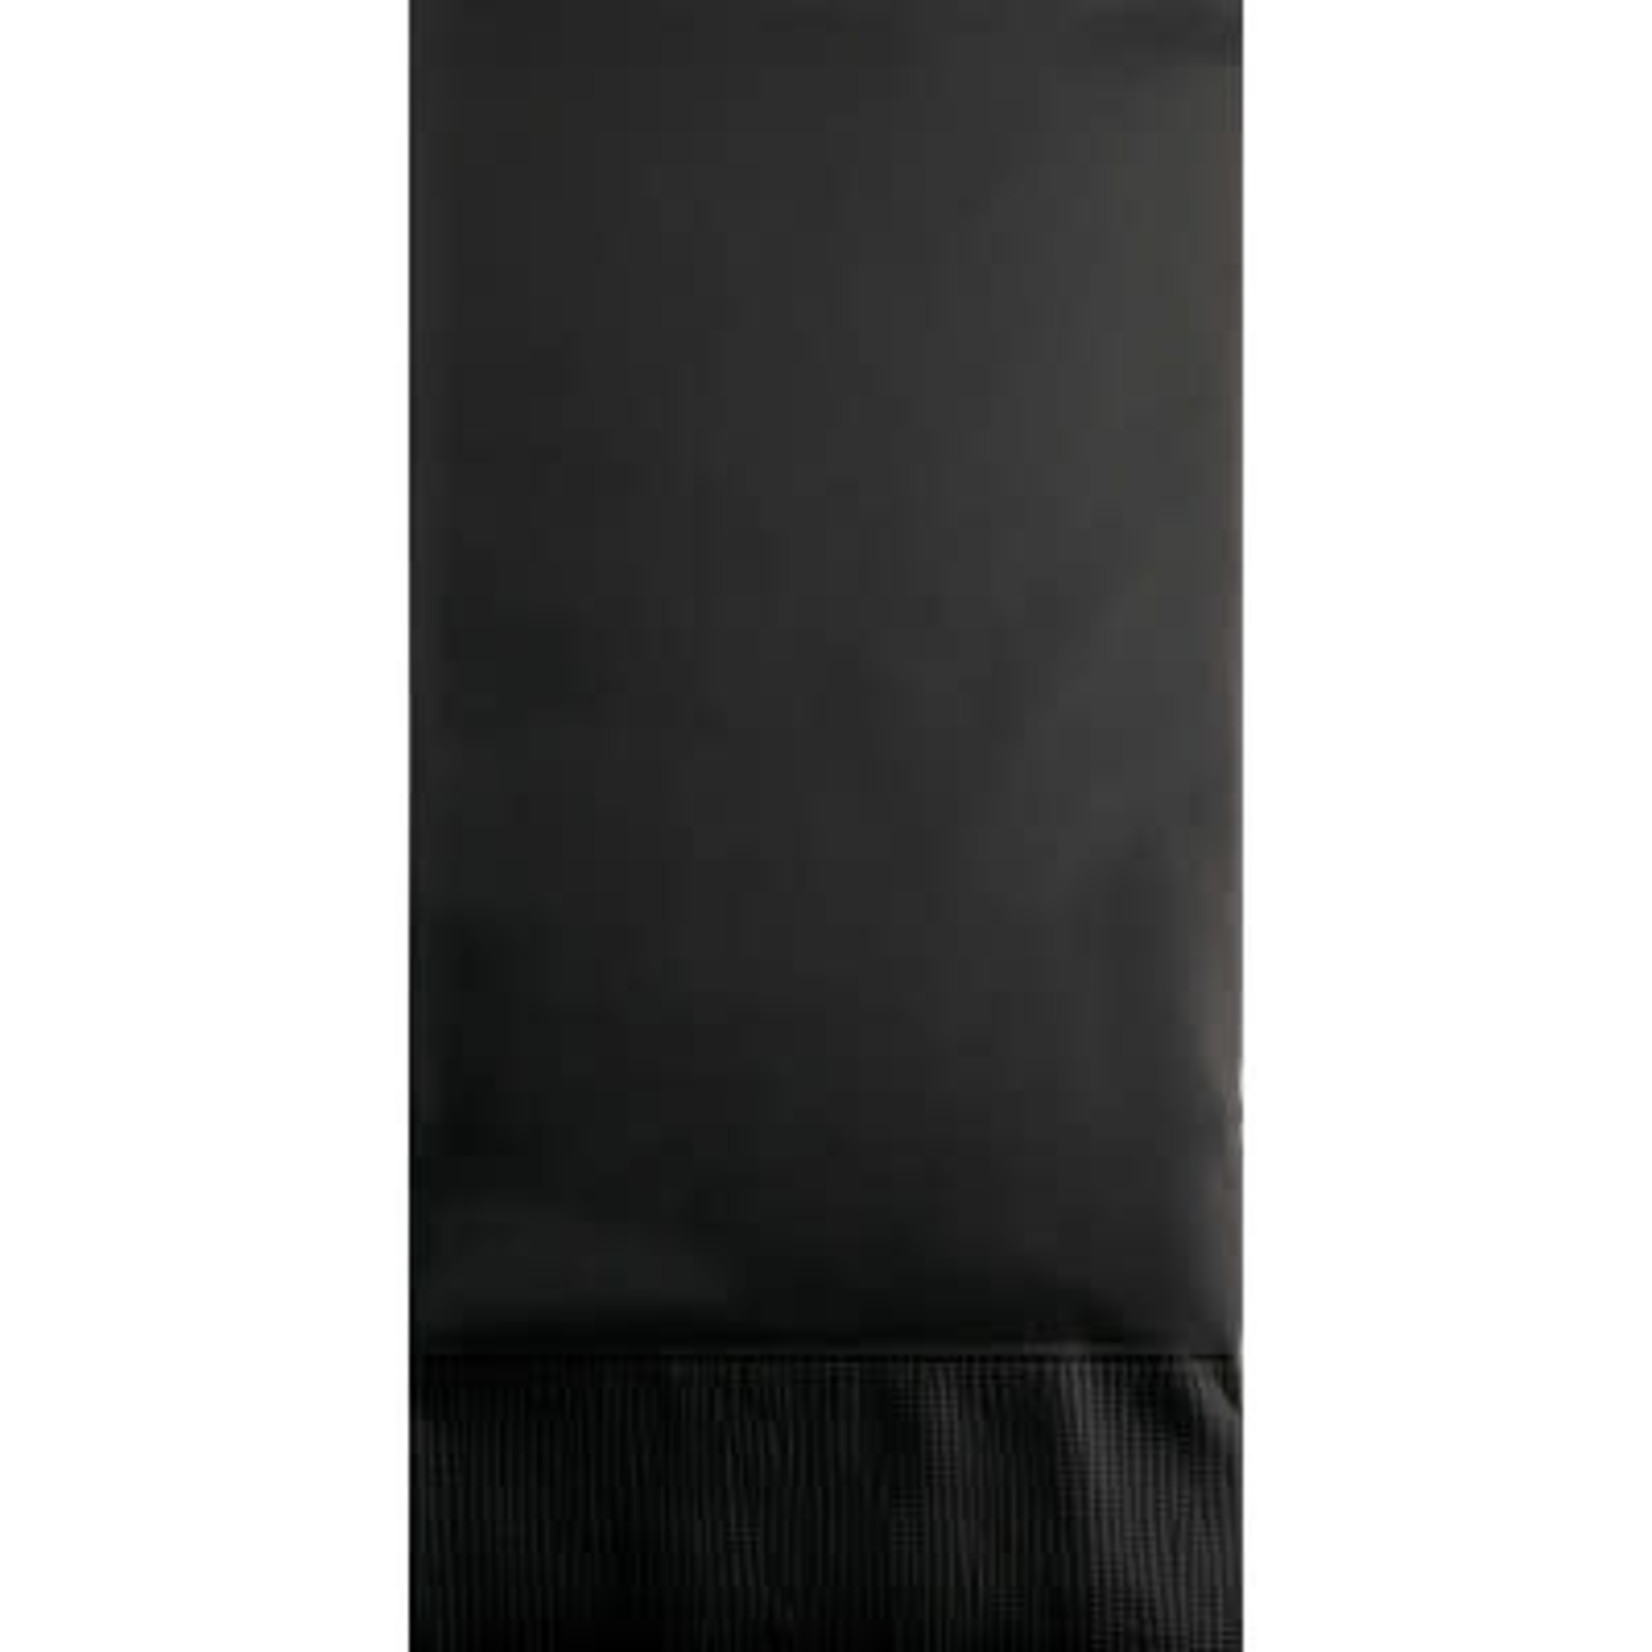 Touch of Color Black 3-Ply Guest Towels - 16ct.